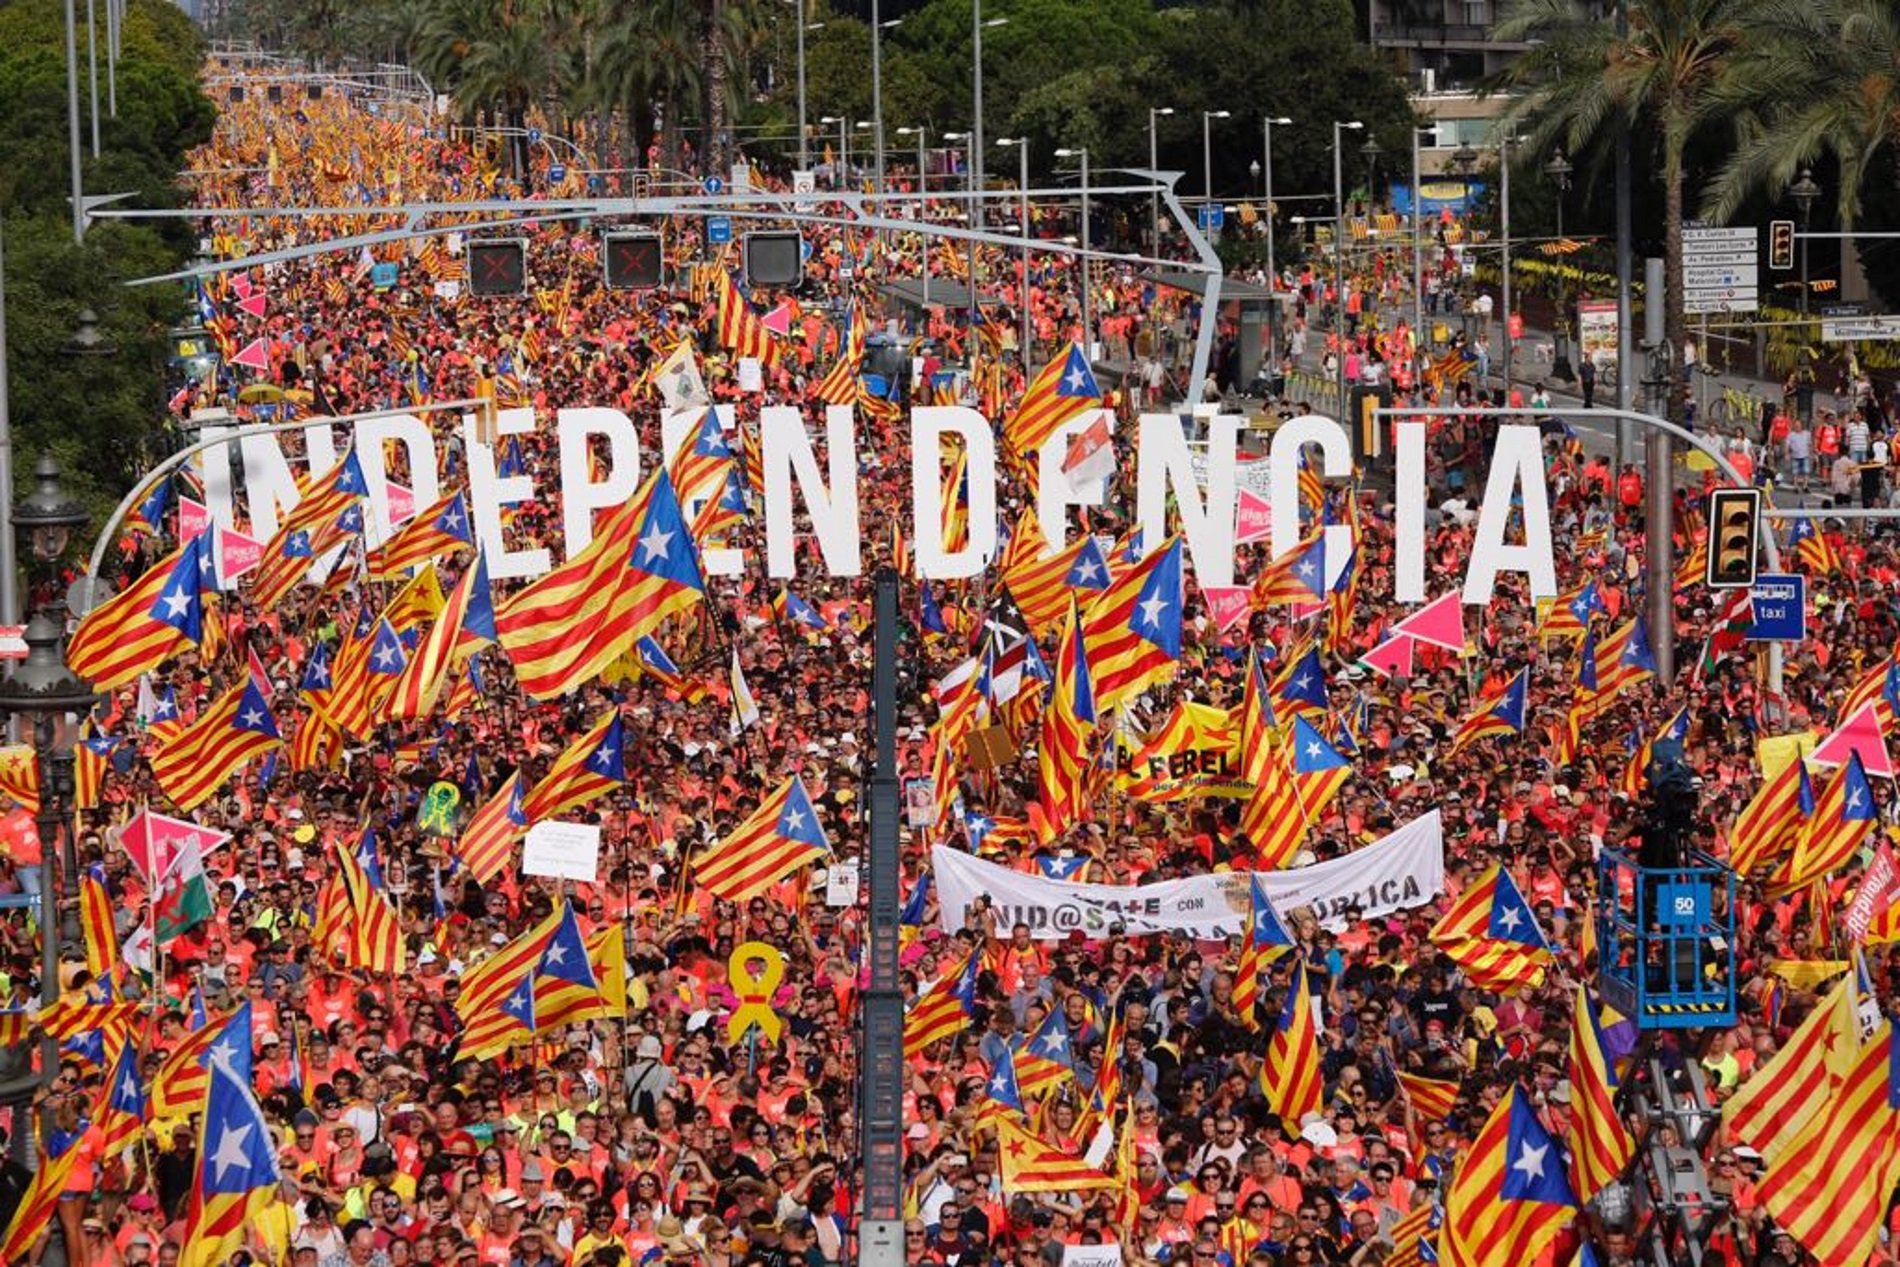 Spain's "hard line" on Catalonia is a disaster, says study in 'Washington Post'